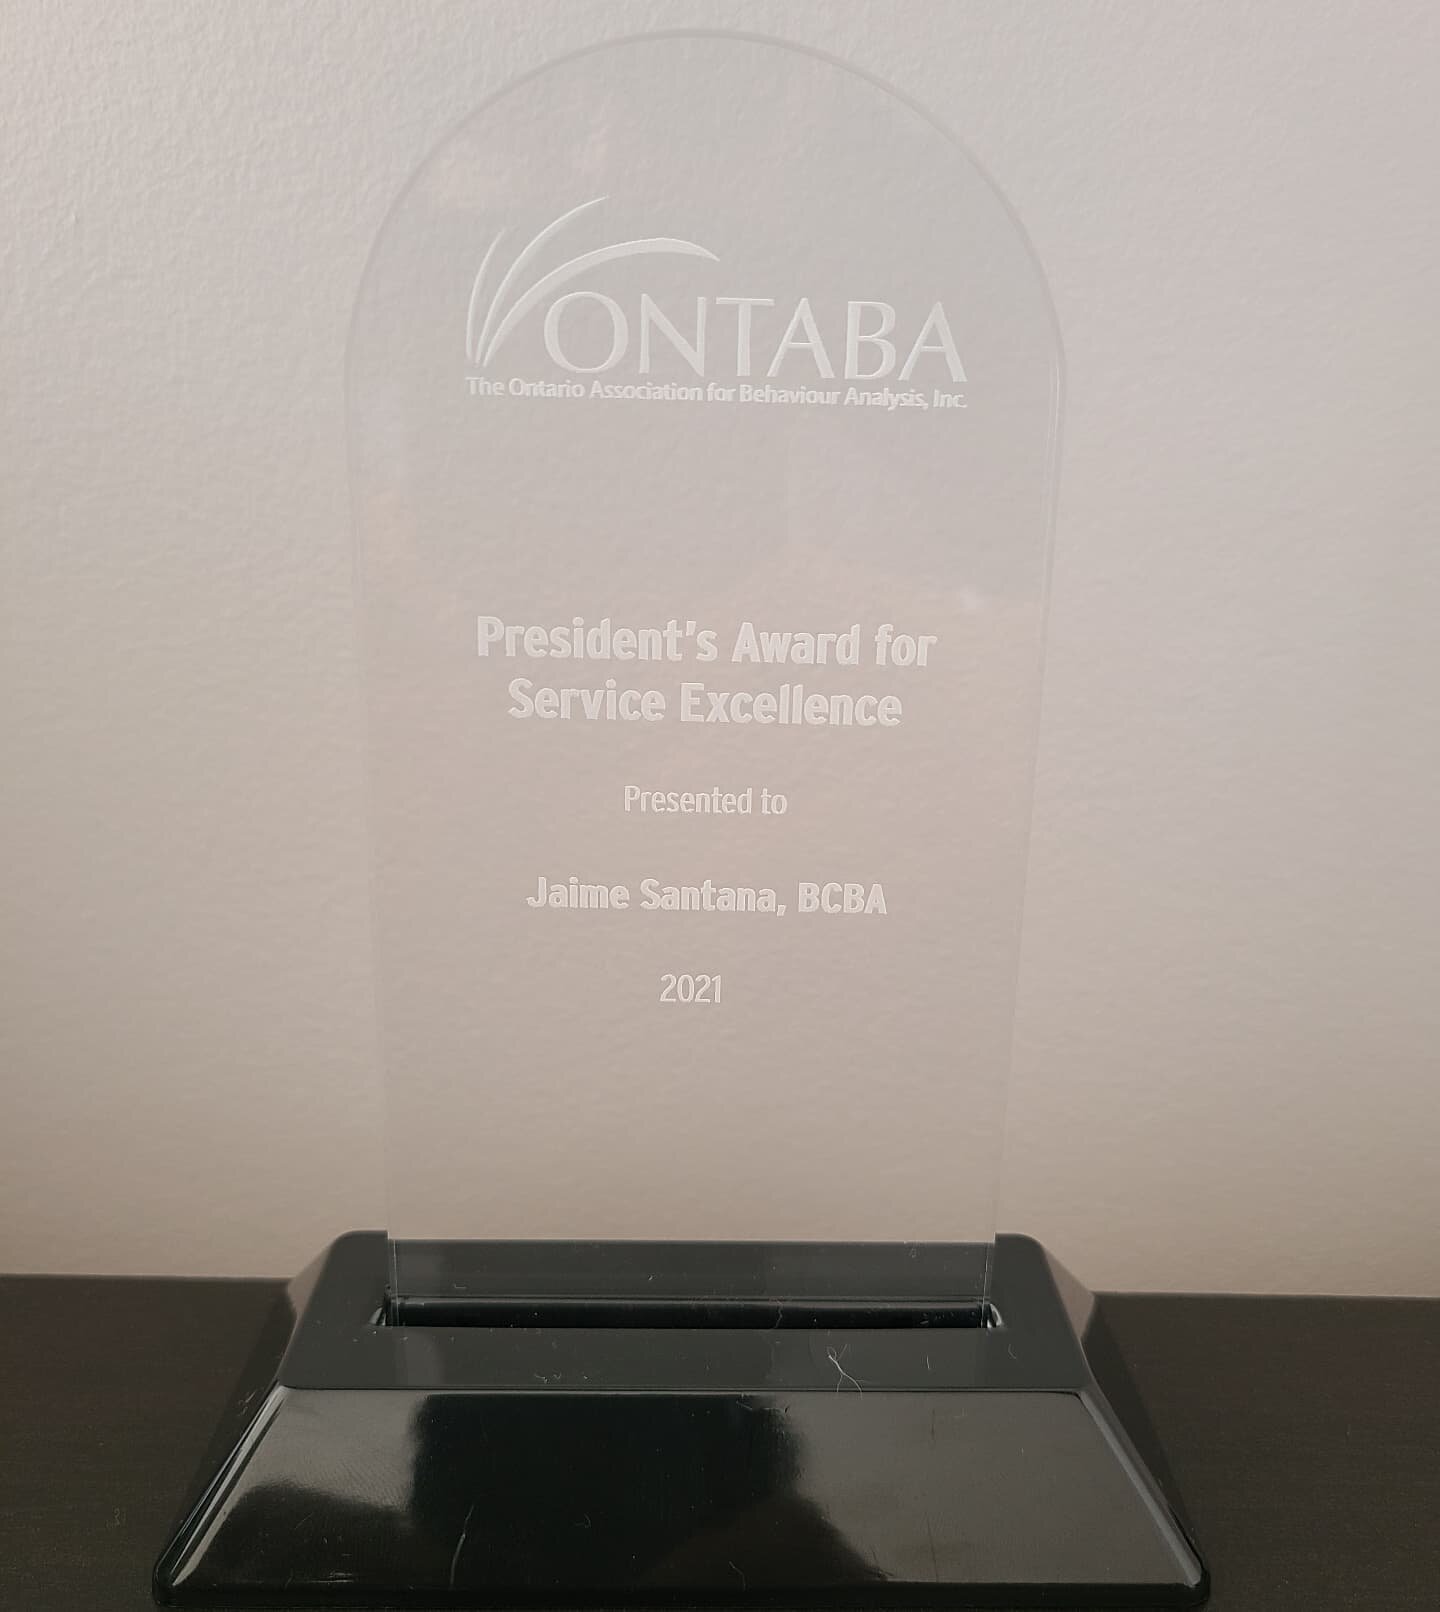 So unbelievably humbled to be awarded the President's Award for Service Excellence by @ontaba1. 

When I chose this field of work, the motivation was never anything other than to help people achieve their goals and live a life they want to, as indepe